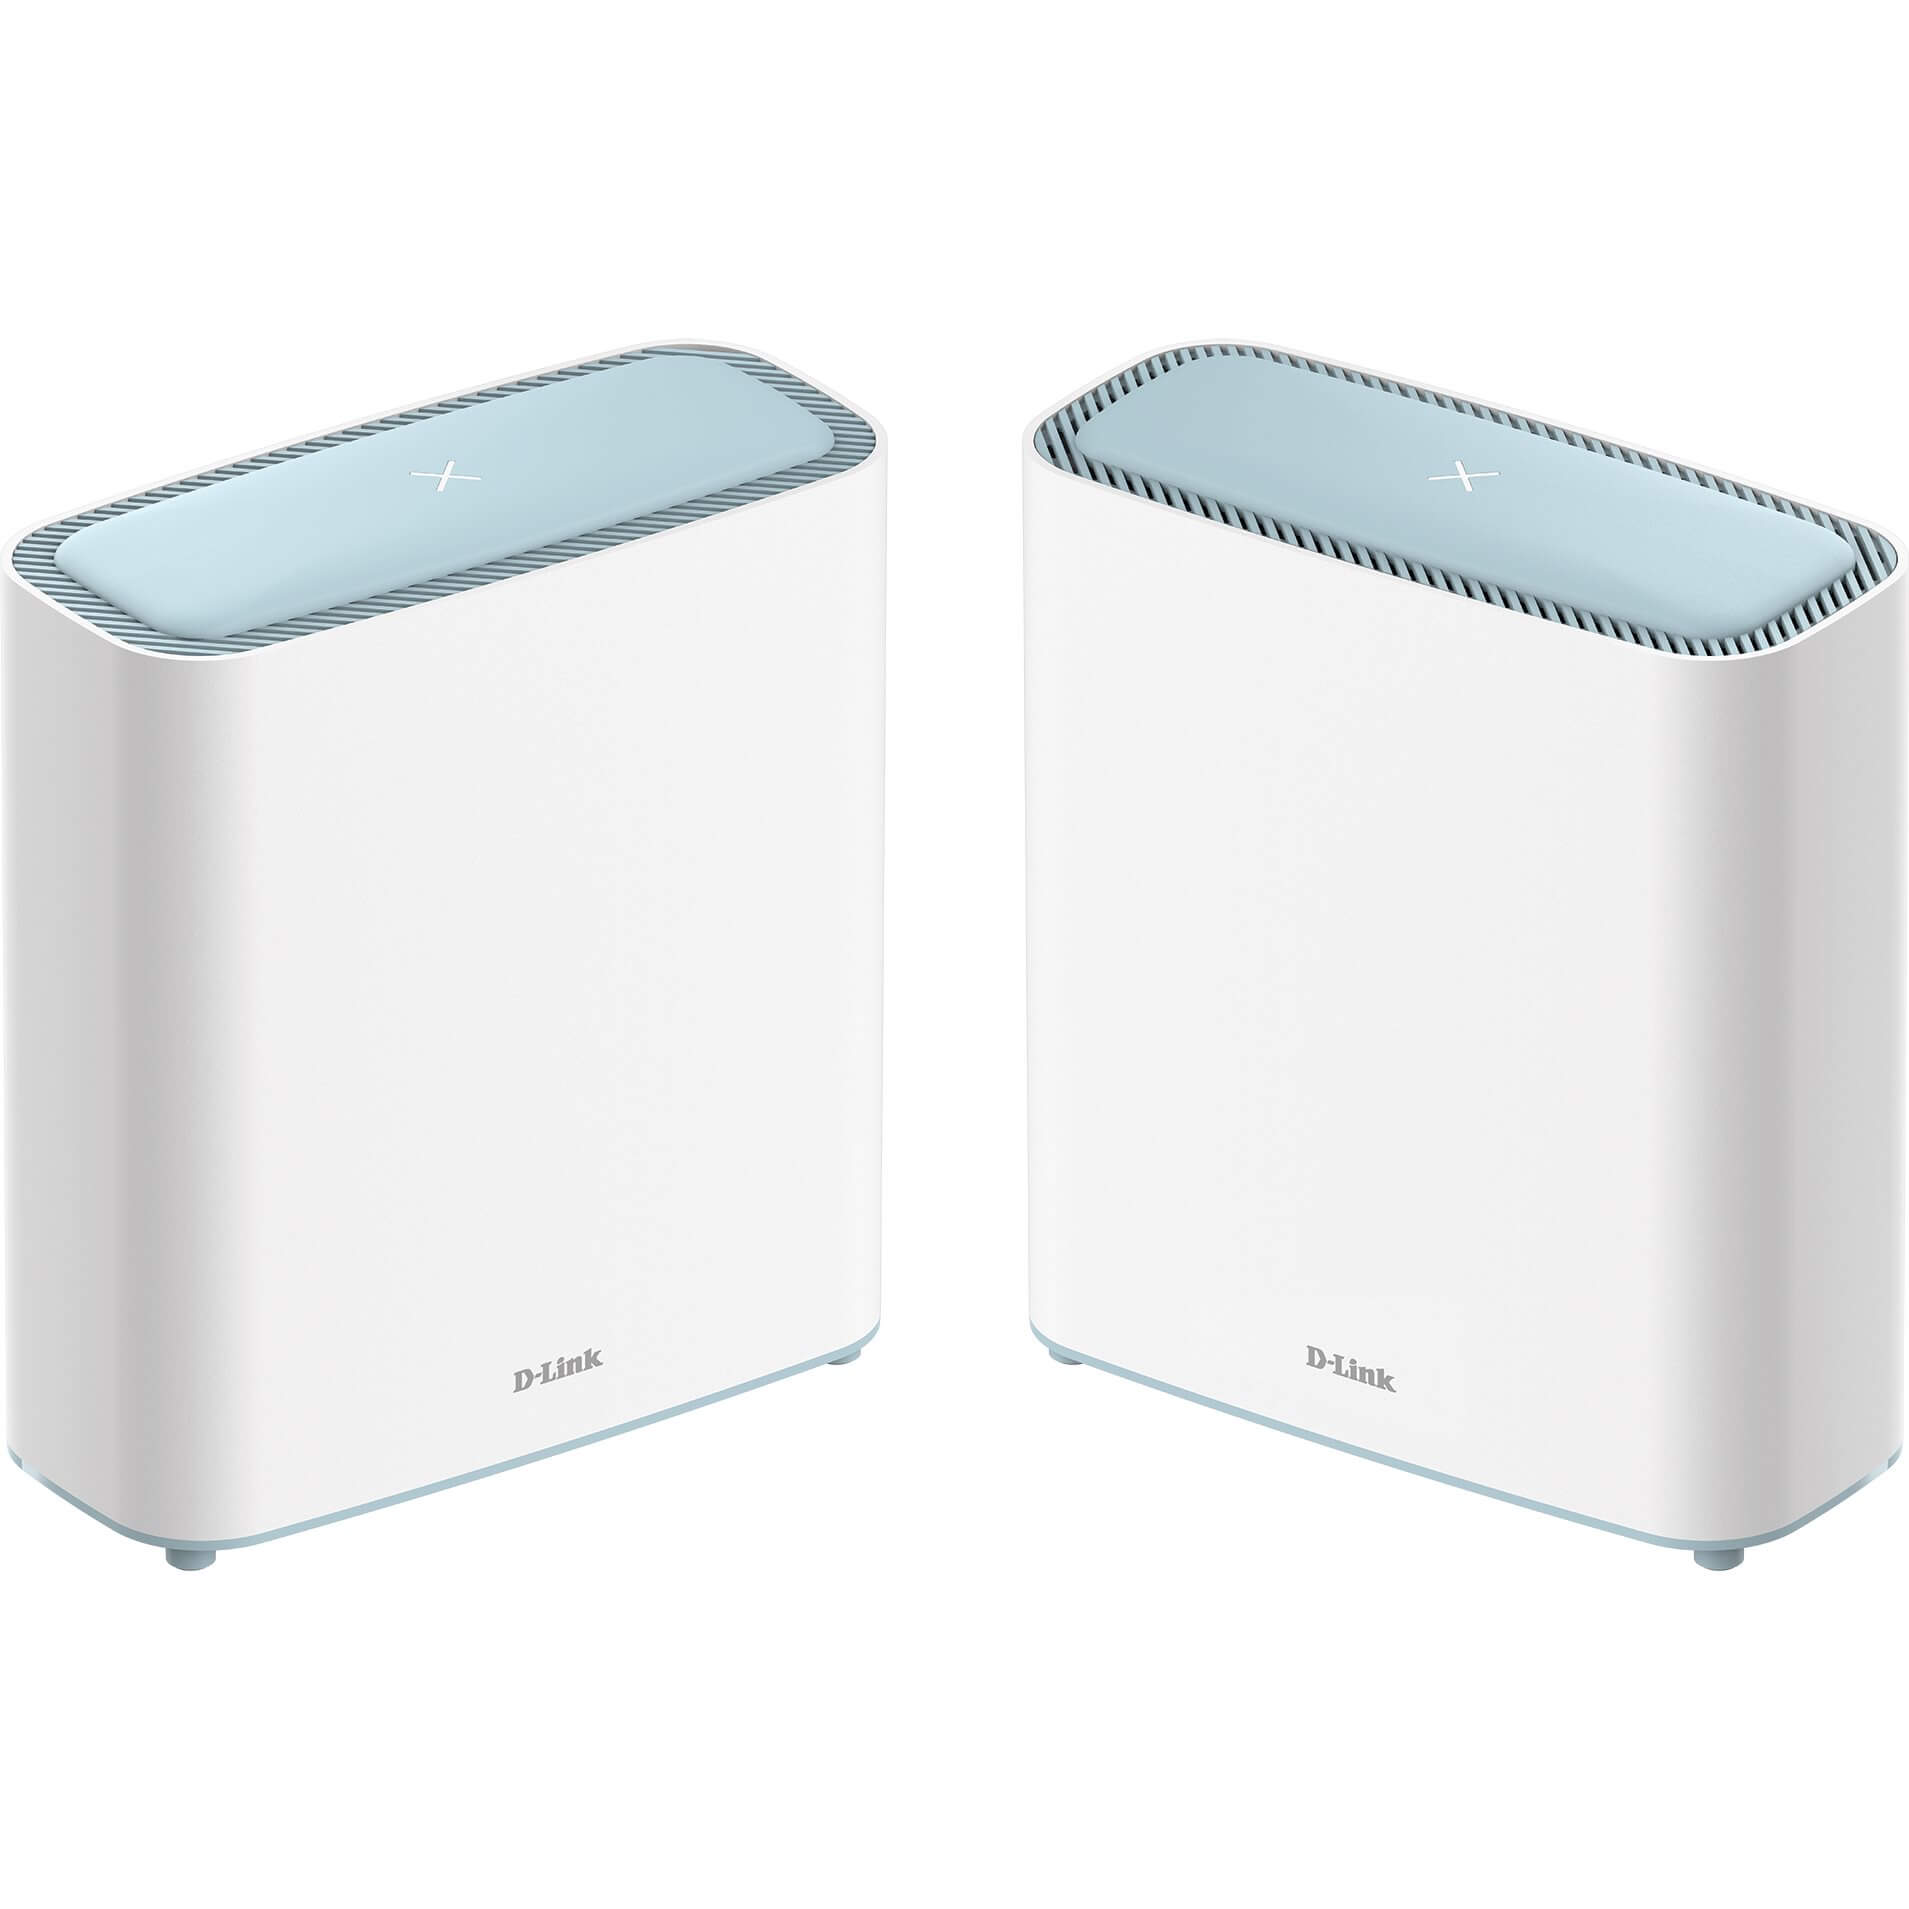   Systme WiFi Mesh   Solution MESH Wi-Fi 6 Eagle Pro AX3200 (Pack de 2) M32-2